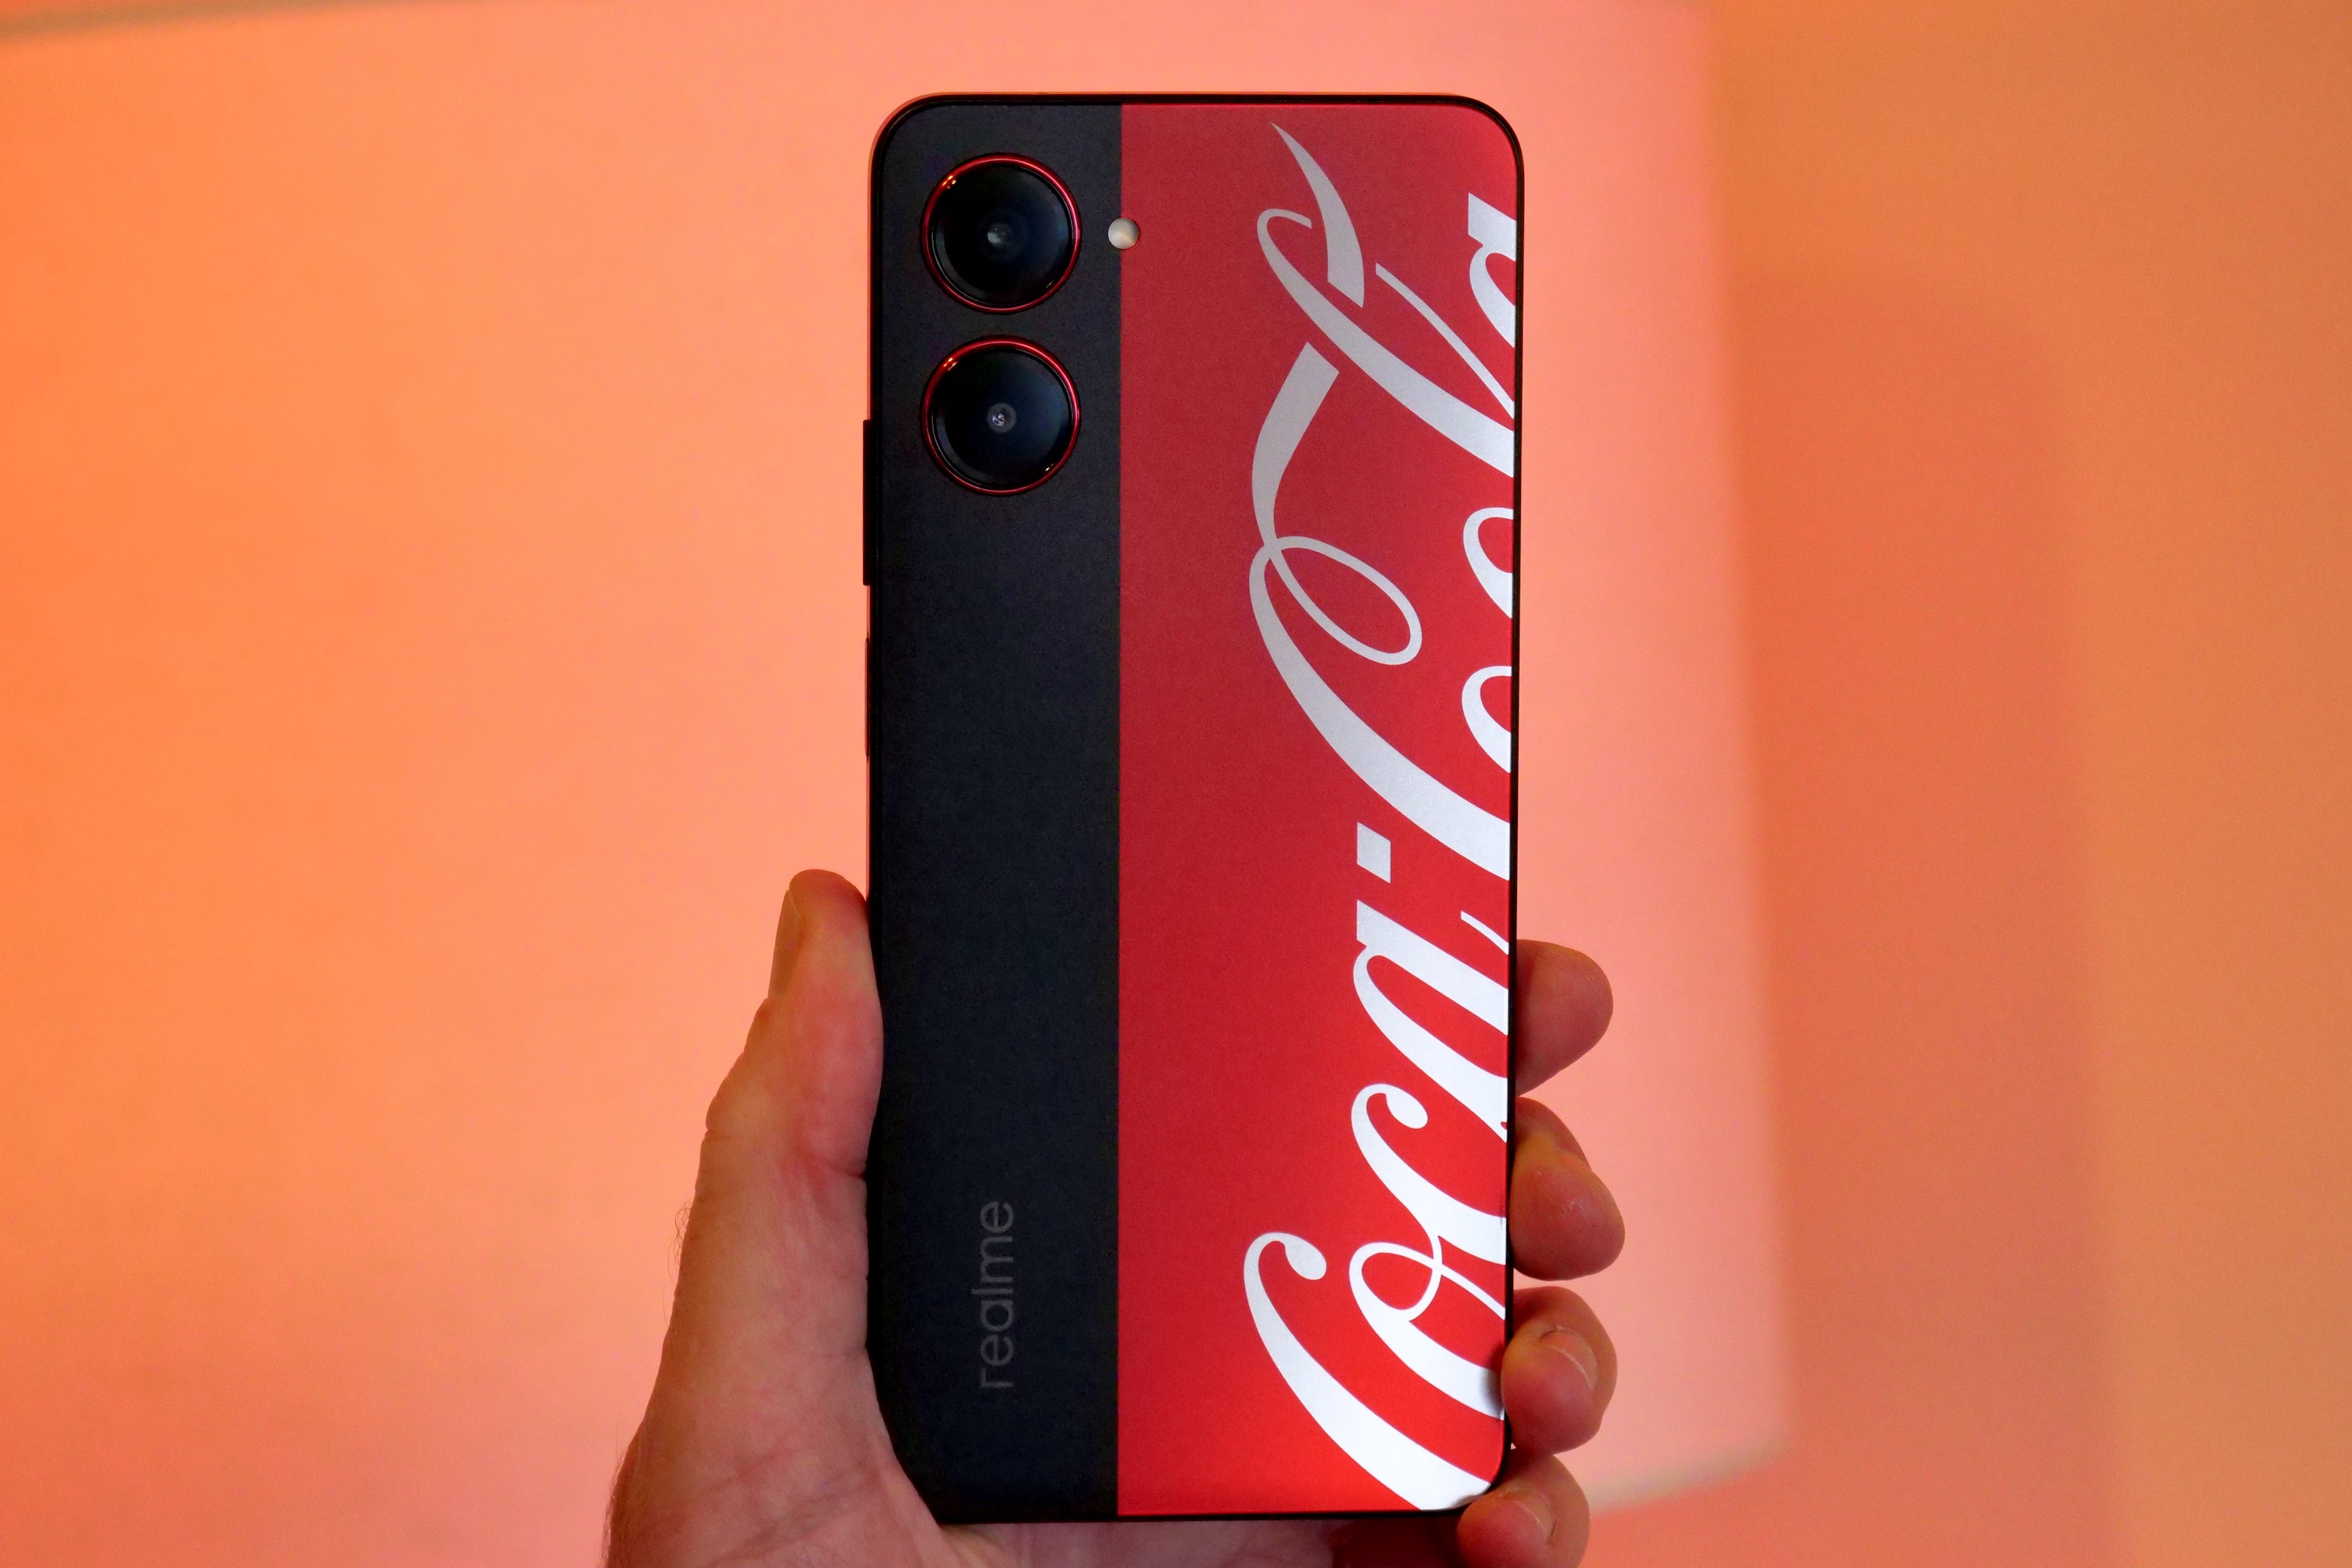 The Realme X Coca-Cola phone held in a person's hand, and seen from the back.